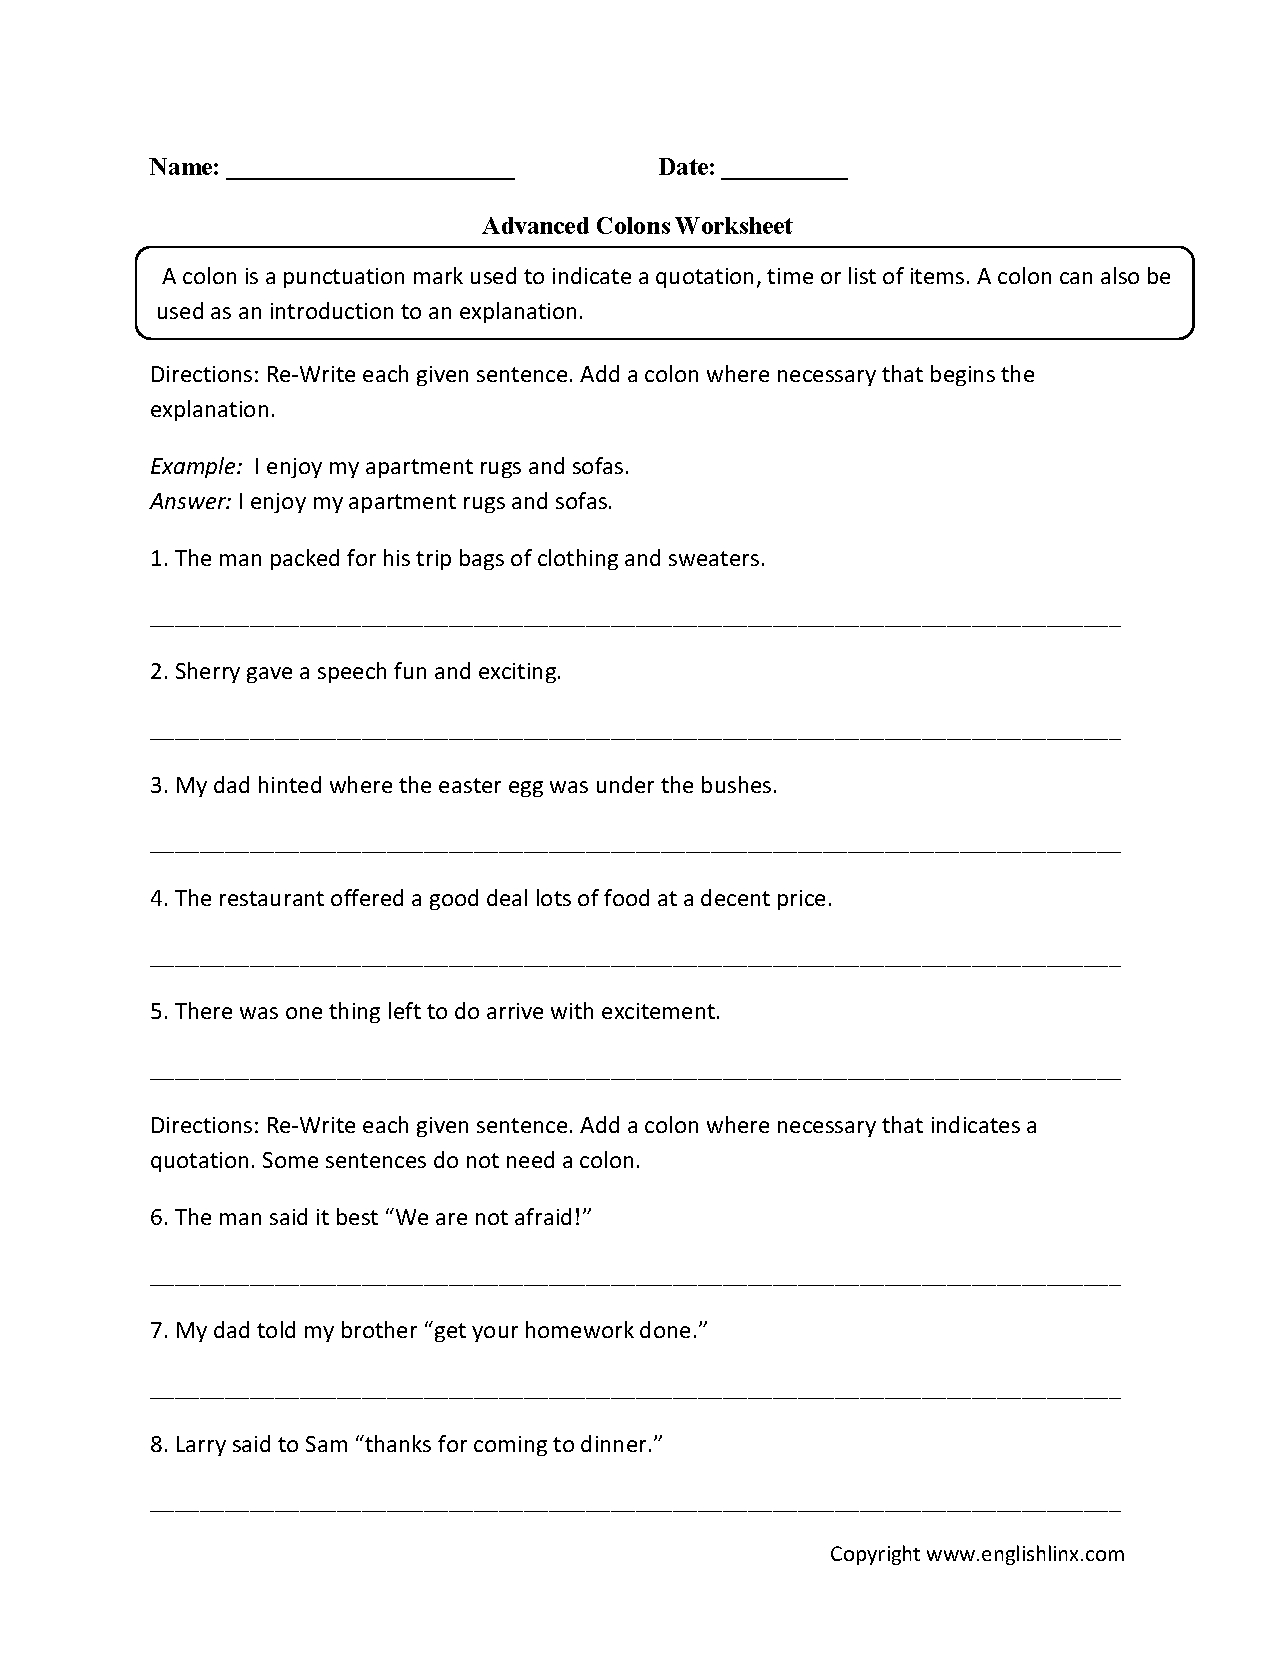 Punctuation Worksheets  Colon Worksheets Within Semicolons And Colons Worksheet Answers